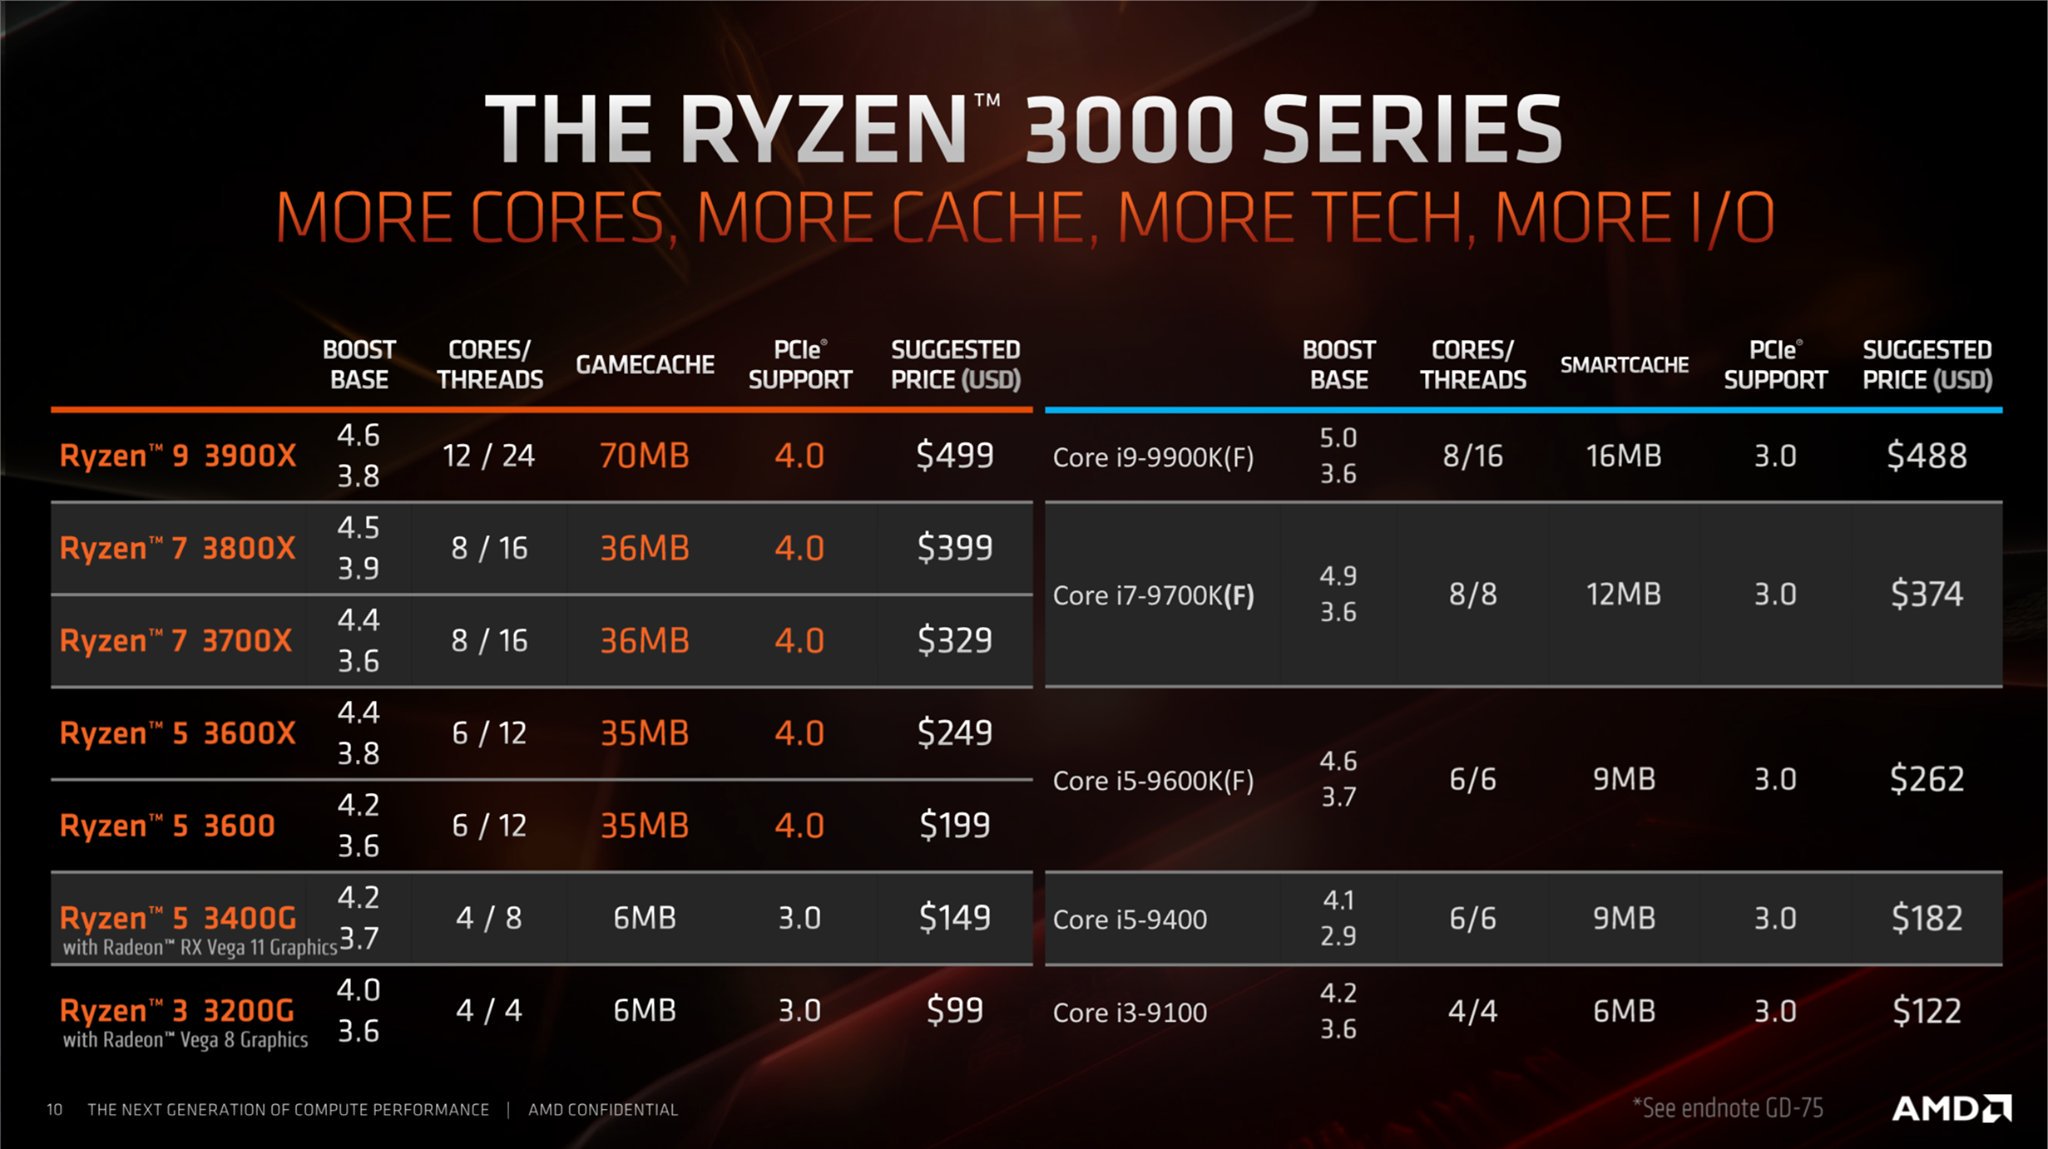 AMD Ryzen 3 3200G and Ryzen 5 3400G APUs specs and pricing leak out 